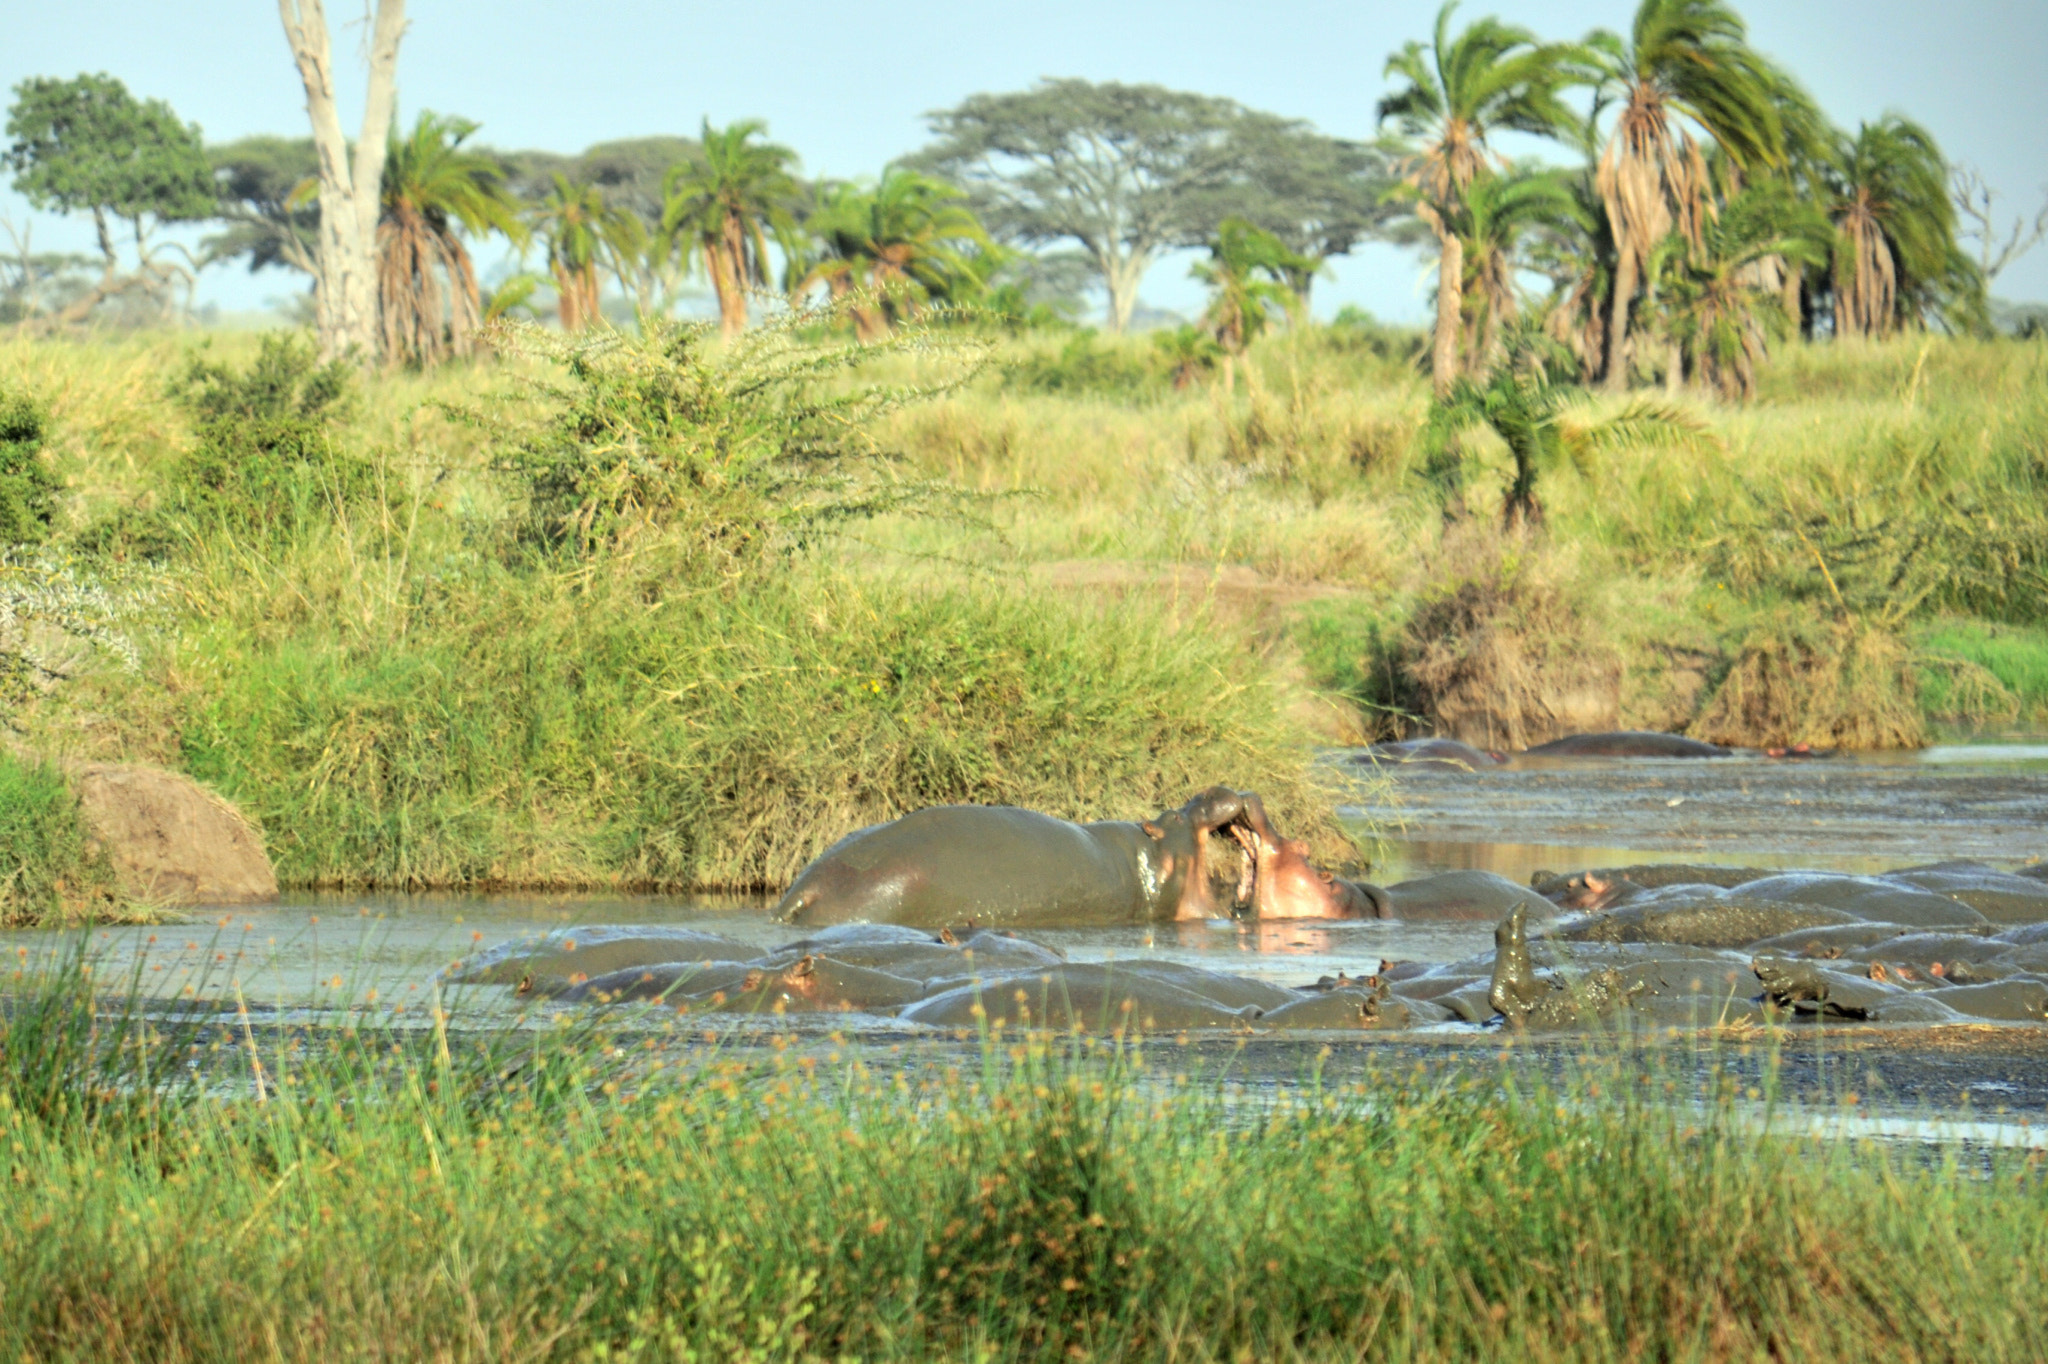 Nikon D90 sample photo. Hippos playing or fighting? photography